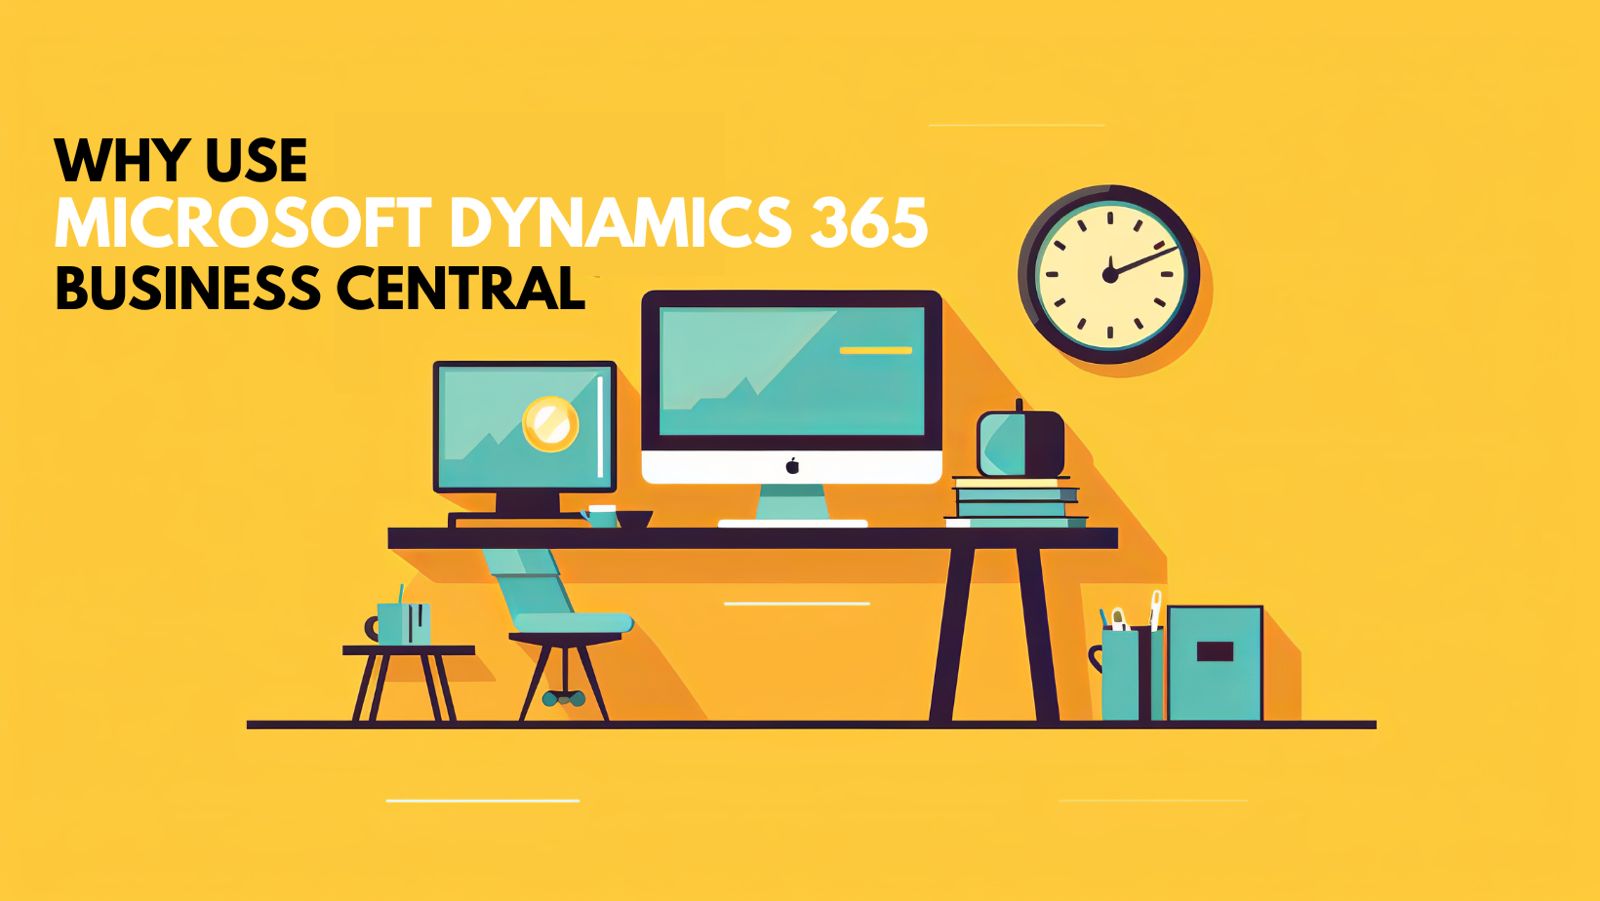 Supercharge Your Business with MicrosoftDynamics 365 Business Central